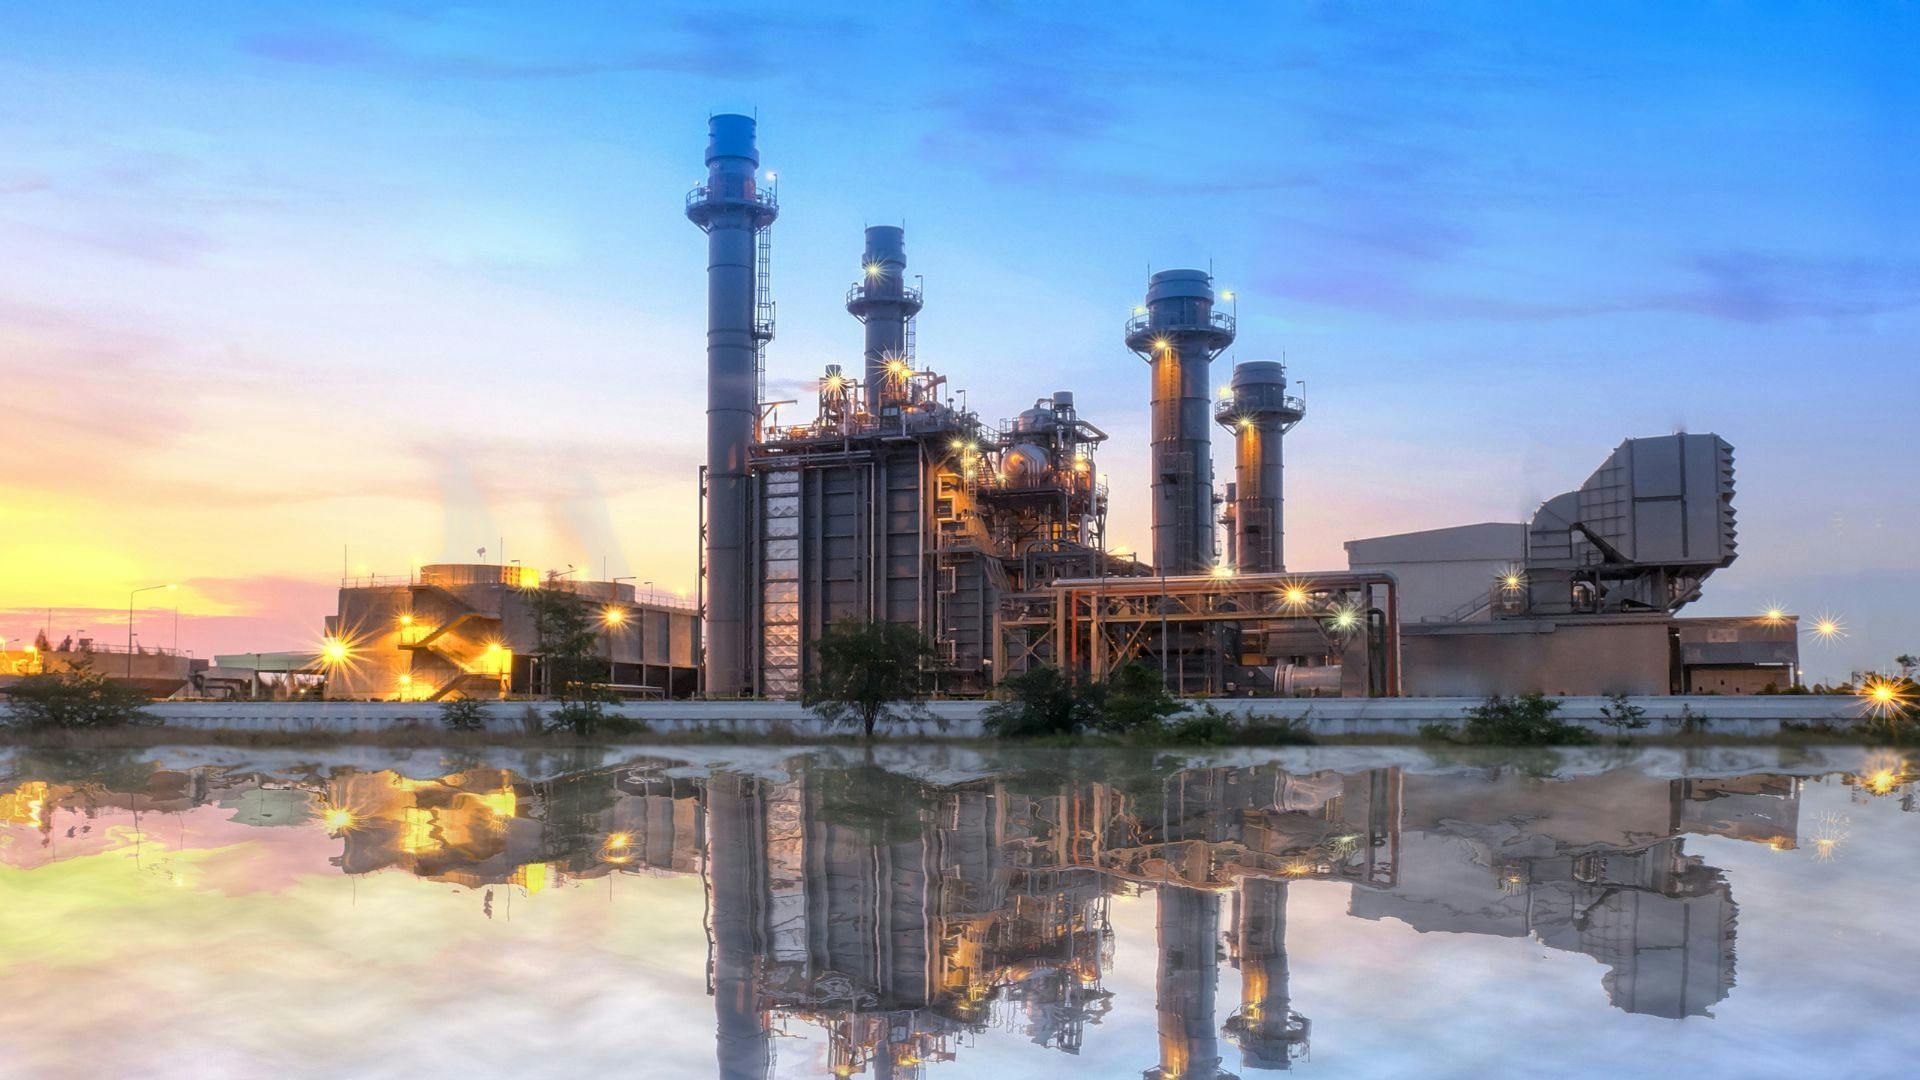 A powerplant from in front of the building in a wide frame showing the large size of the plant. 